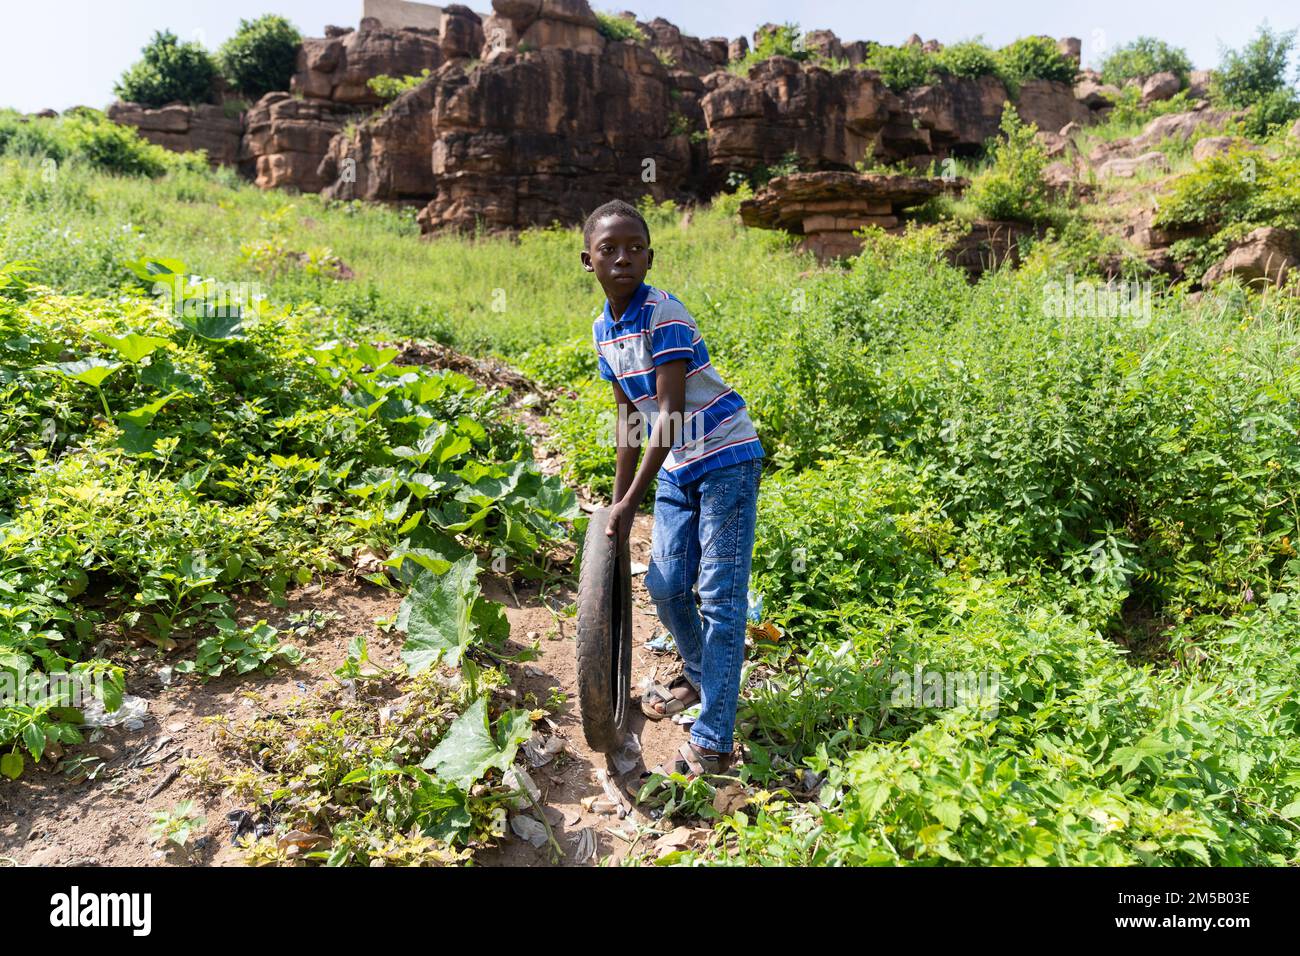 Cute African boy playing alone with an old tire letting it roll down the hill on a dirt path Stock Photo